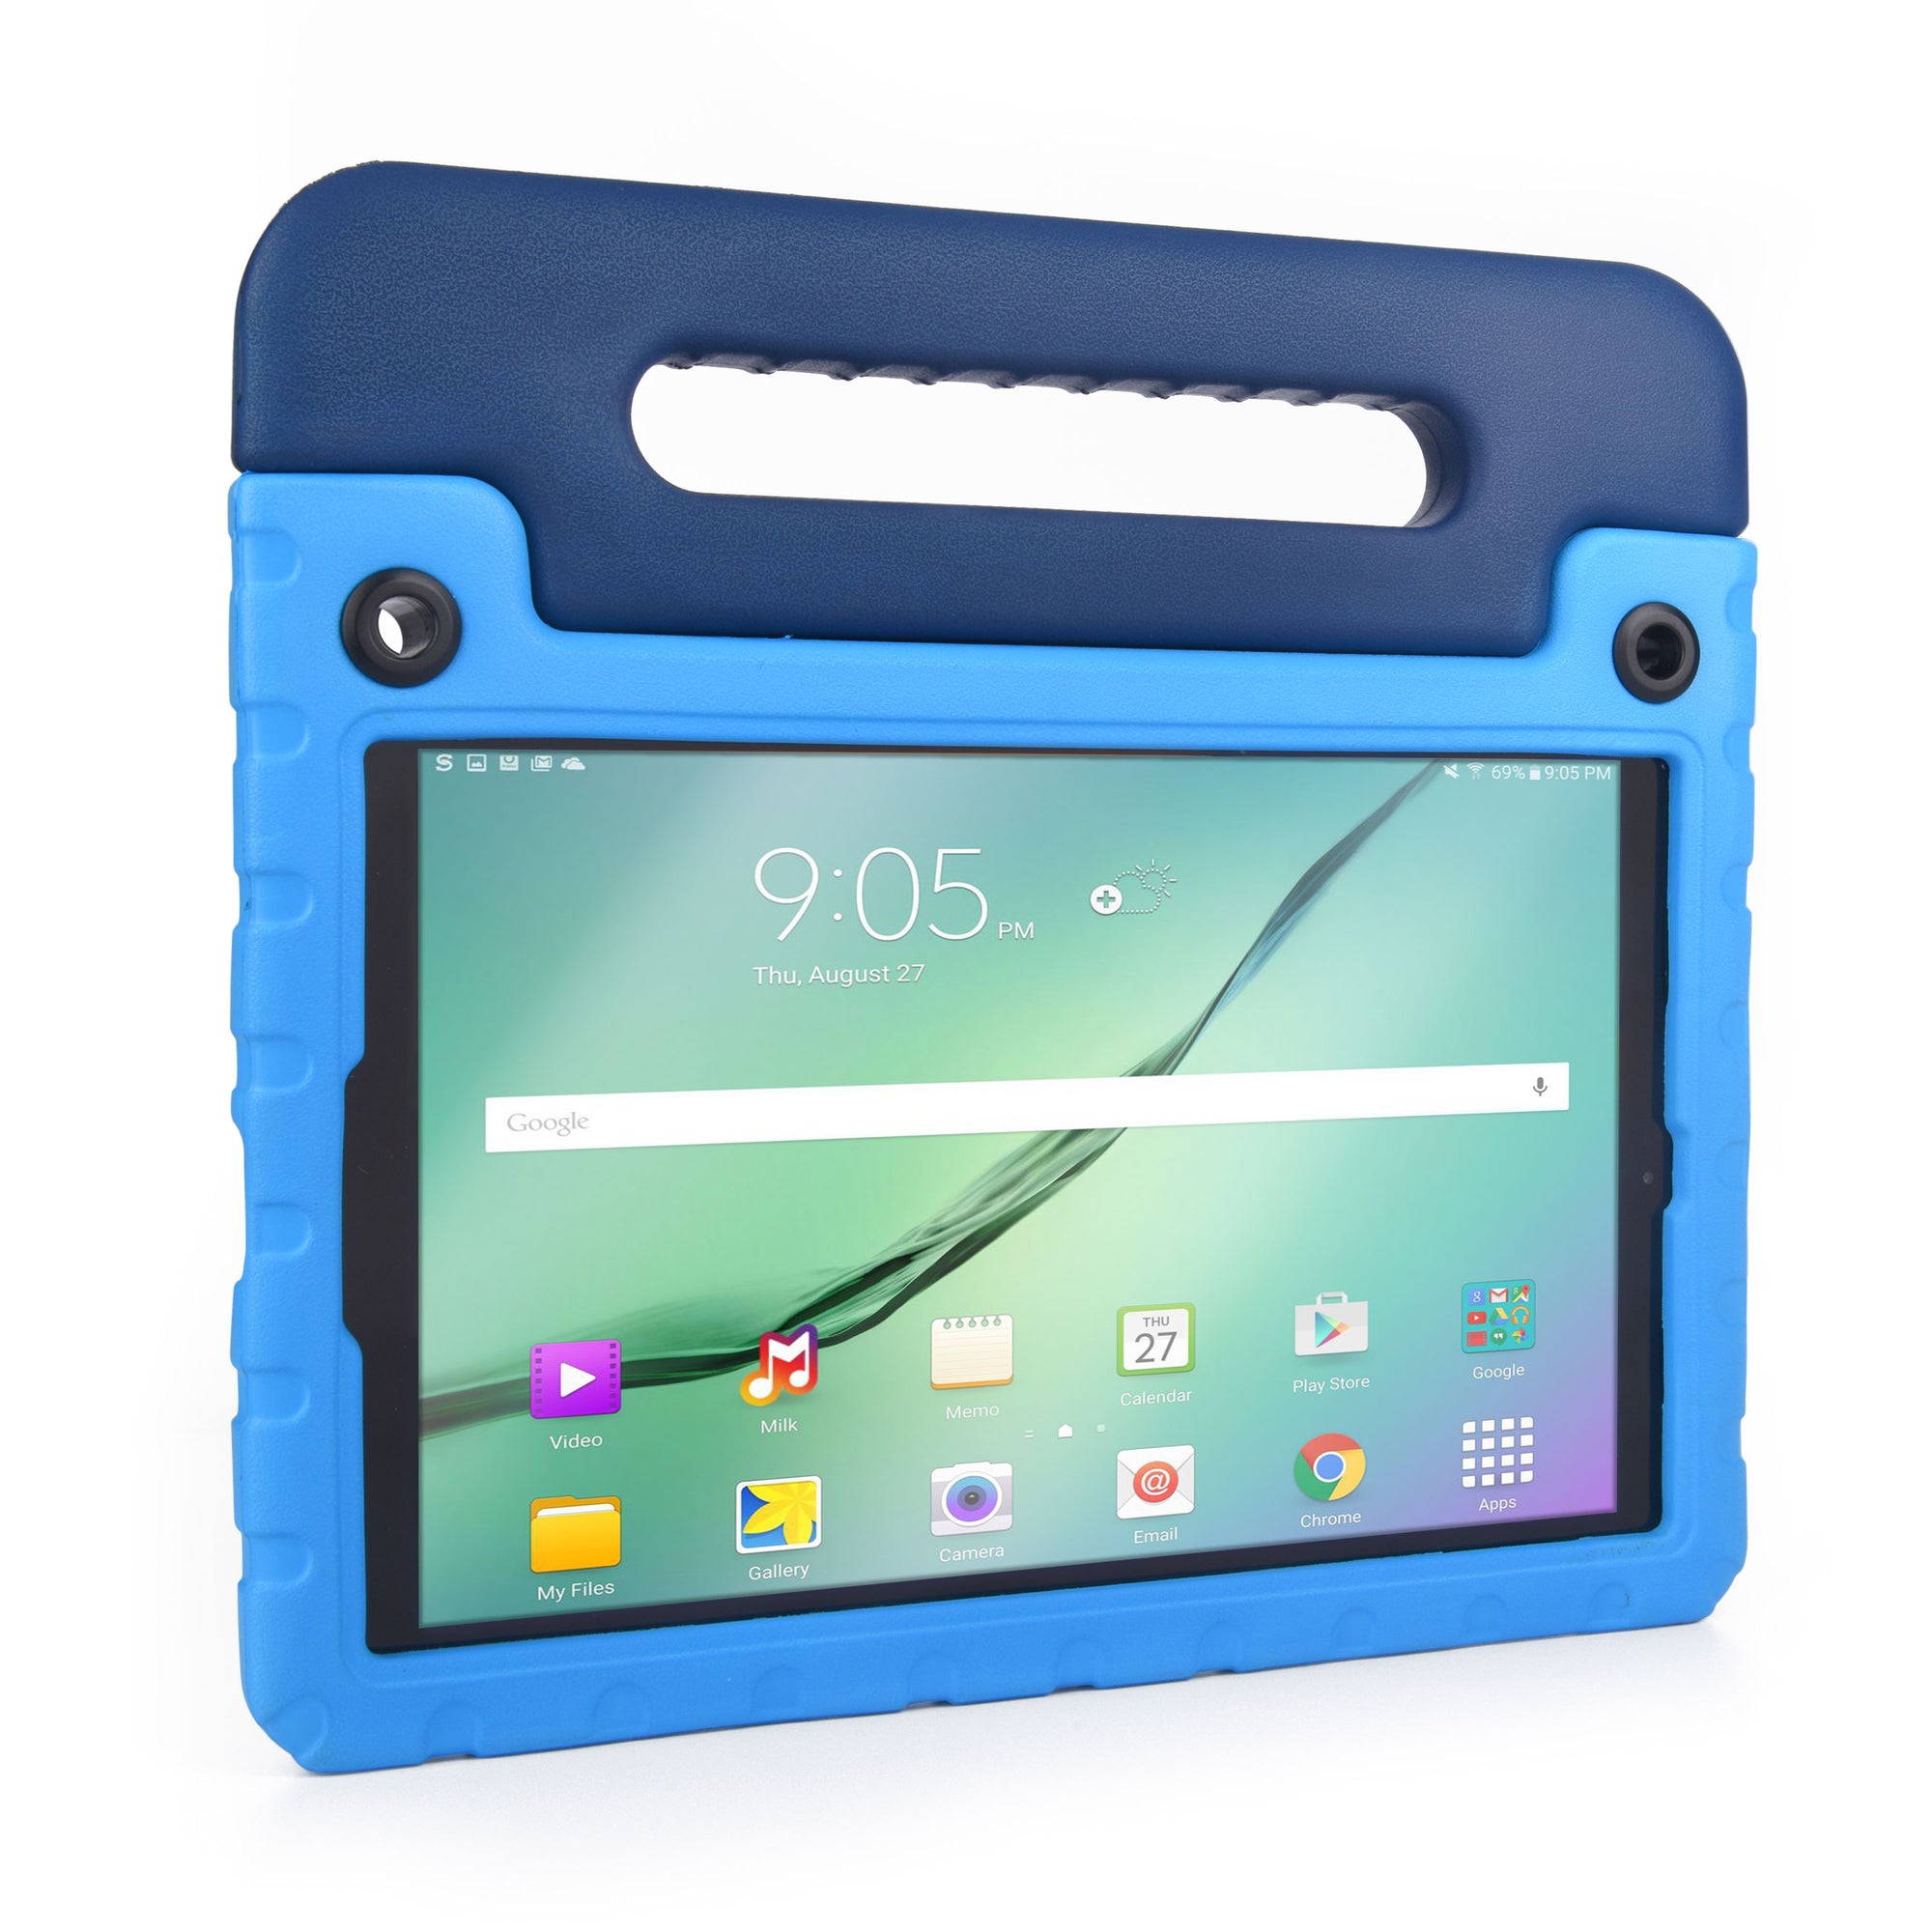 Buddy Antibacterial Protective Kids case for Samsung Galaxy Tab A 10.5 (2018) // Handle+Stand, Shoulder Strap, Screen Spray